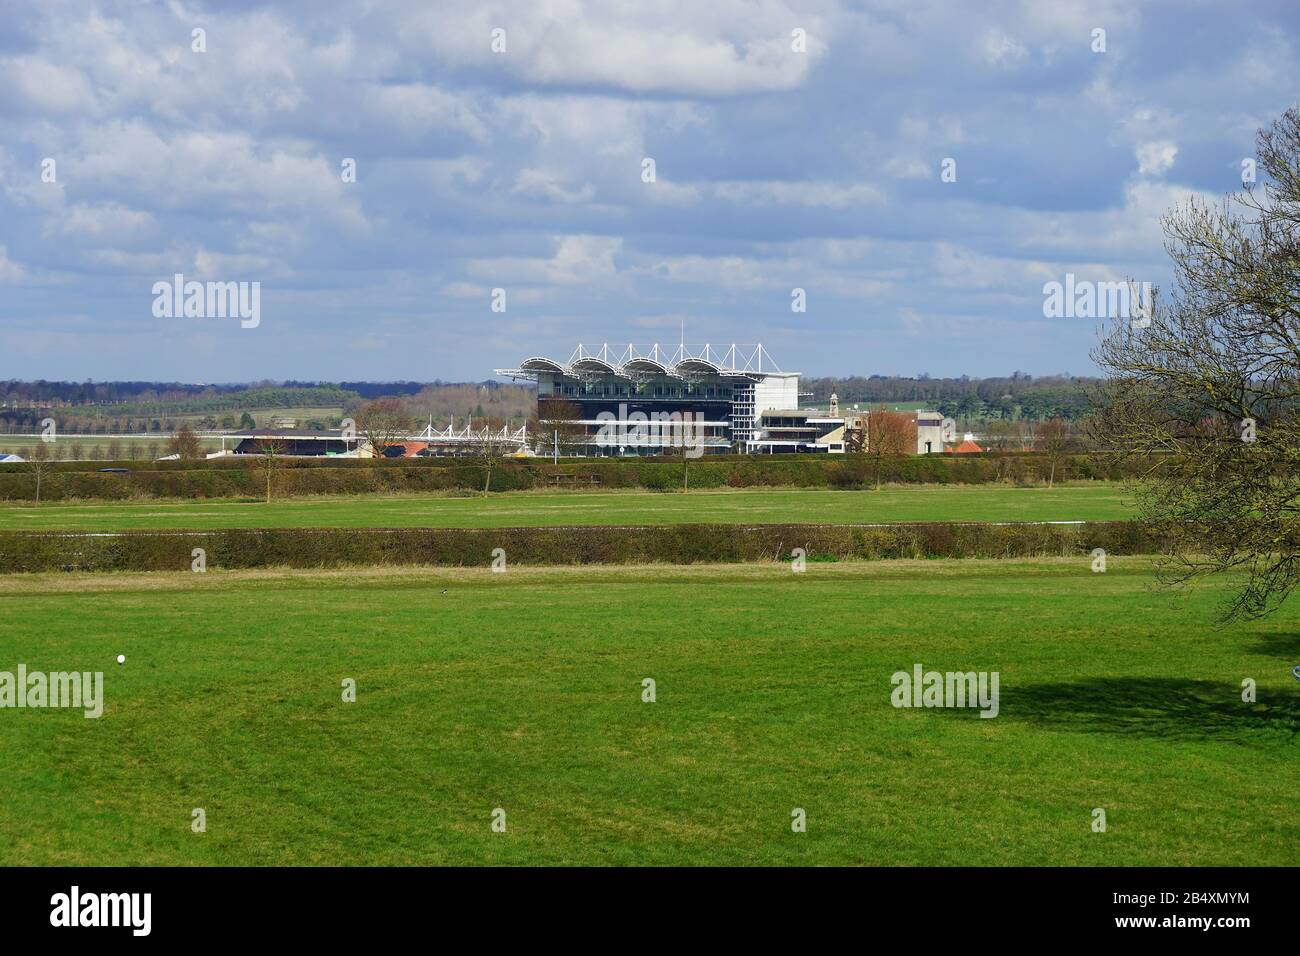 A view across to the Millenium Grandstand at the Rowley Mile Racecourse, Newmarket Stock Photo